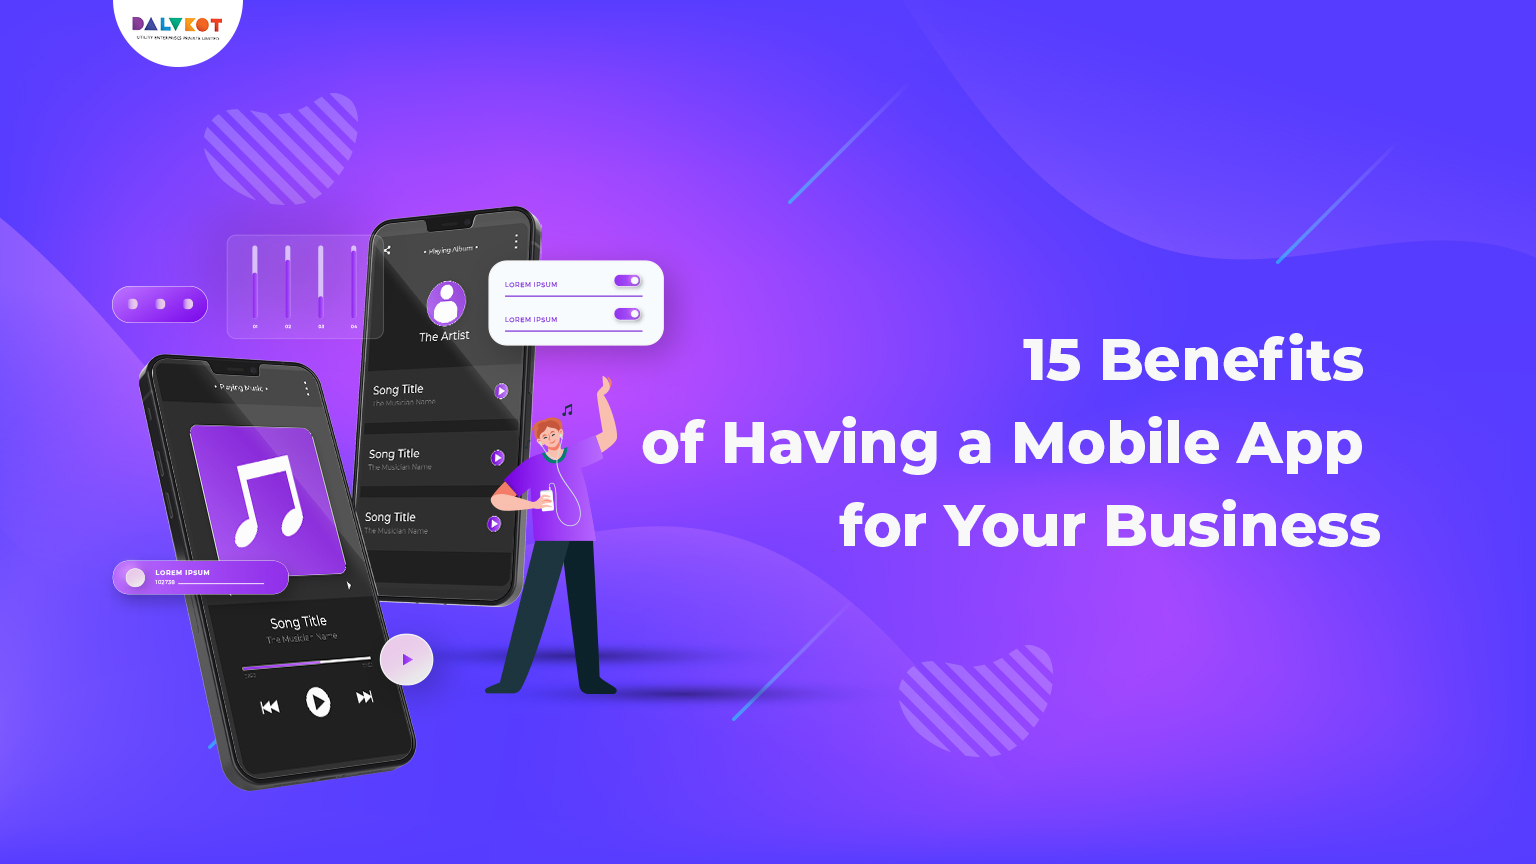 15 Benefits of Having a Mobile App for Your Business